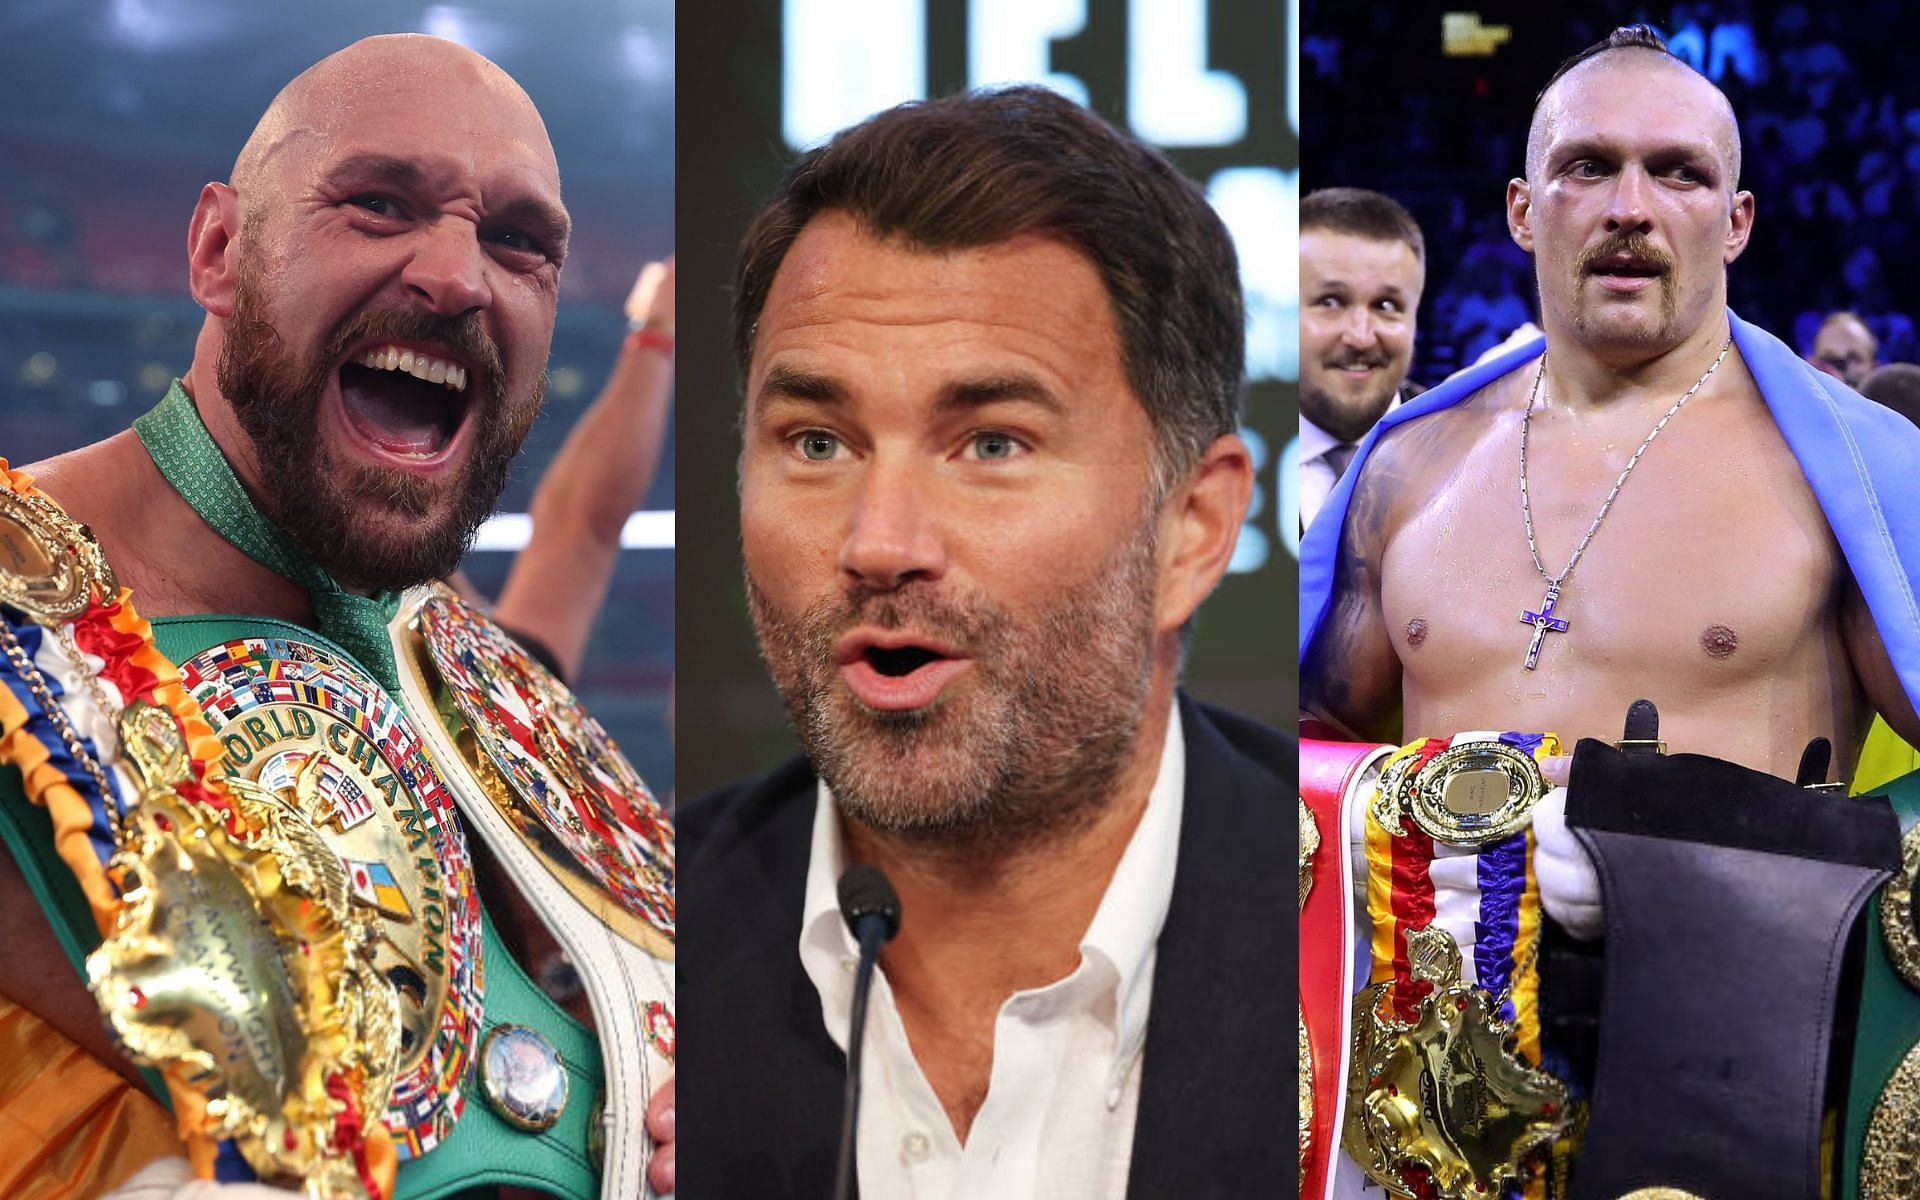 Tyson Fury (left), Eddie Hearn (middle) and Oleksandr Usyk (right) [Images Courtesy: @GettyImages]